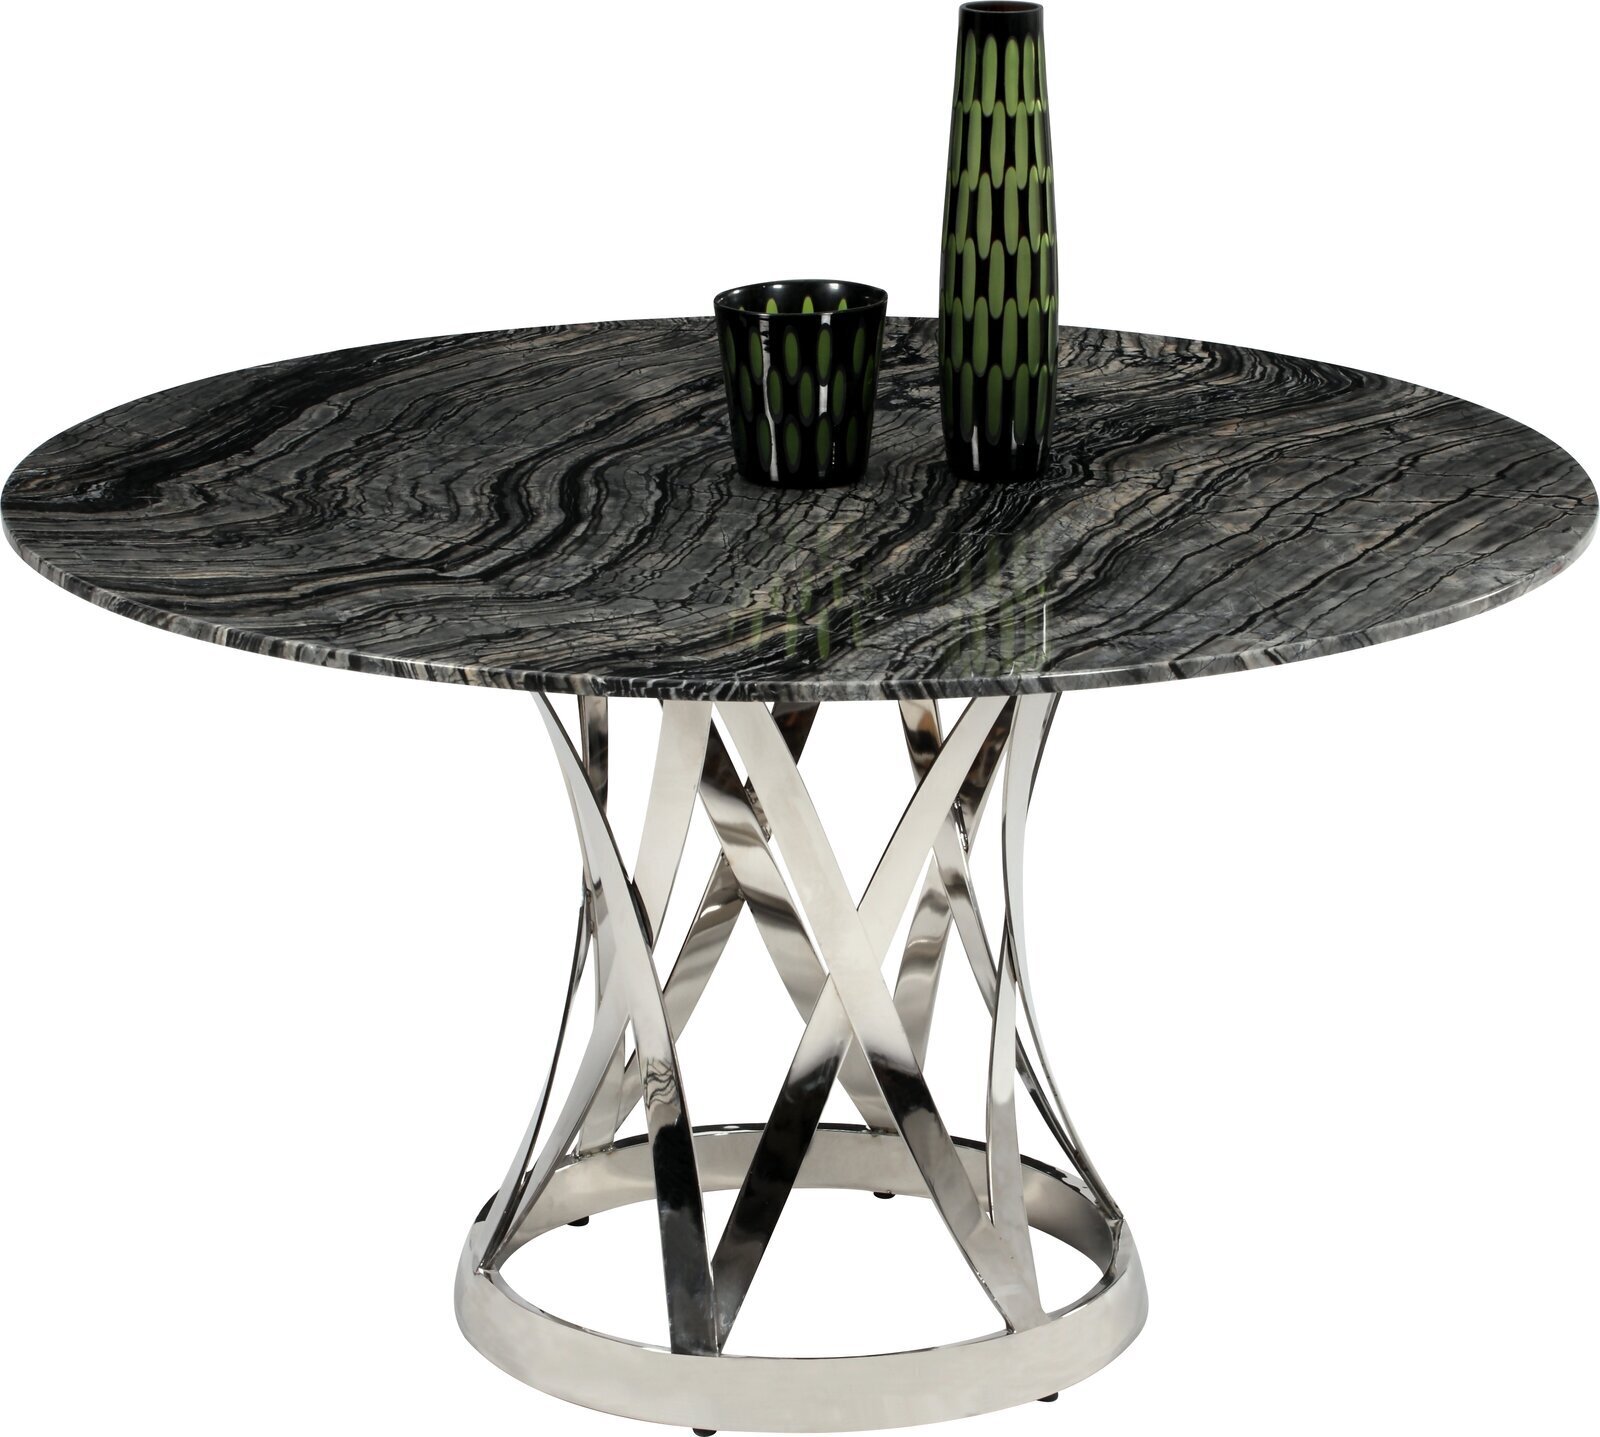 Striking black marble top dining table with chrome base